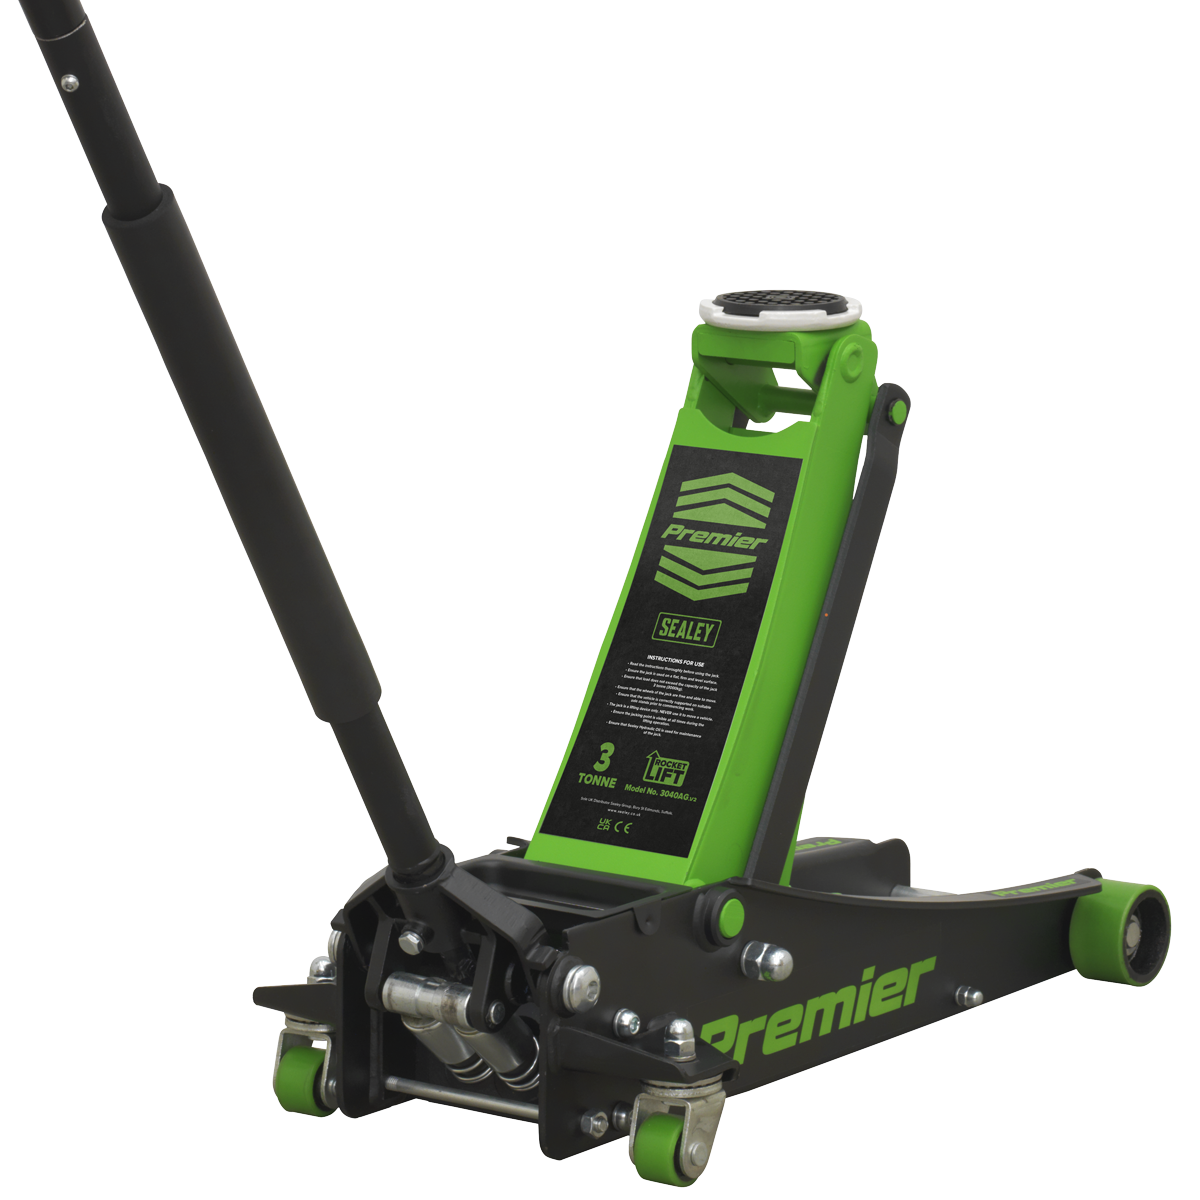 Sealey 3tonne Trolley Jack with Rocket Lift - Green 3040AG